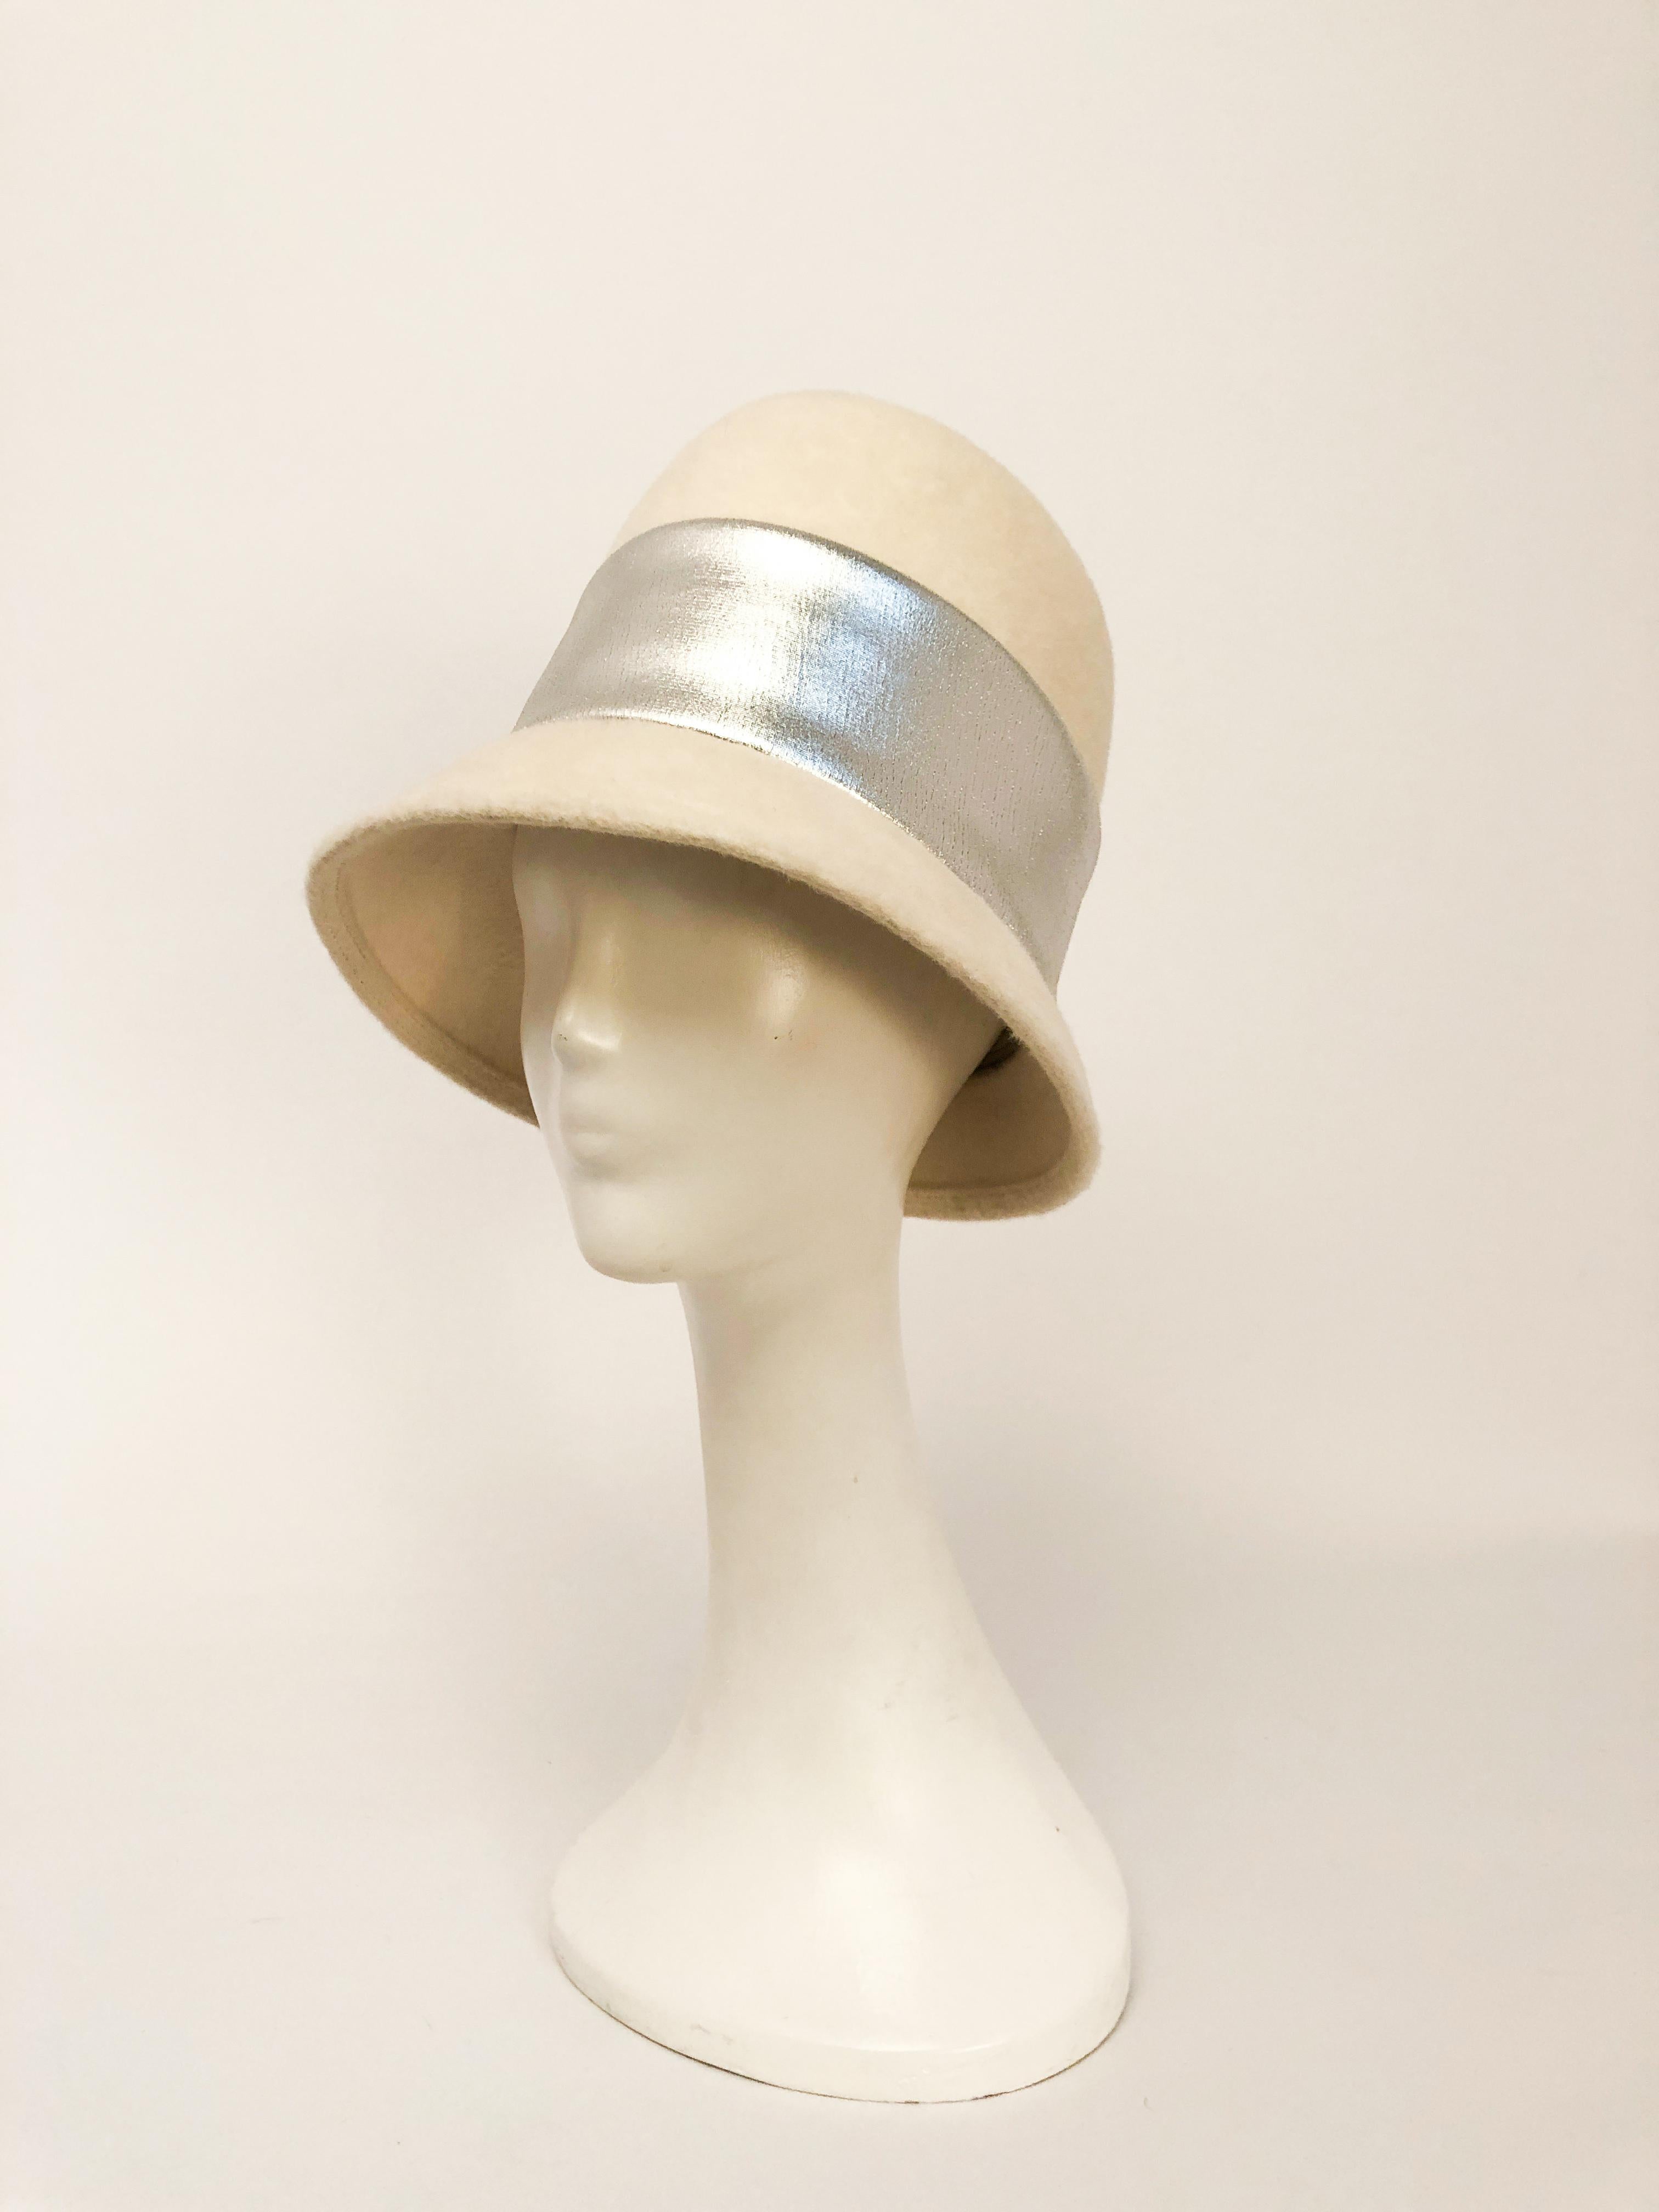 1960s Cream Mod Hat. Cream mod beaver felt hat with extremely high crown, typical of 60s high fashion, wide silver band with covered button closure on the back, and brim narrows toward the back. Made in West Germany.